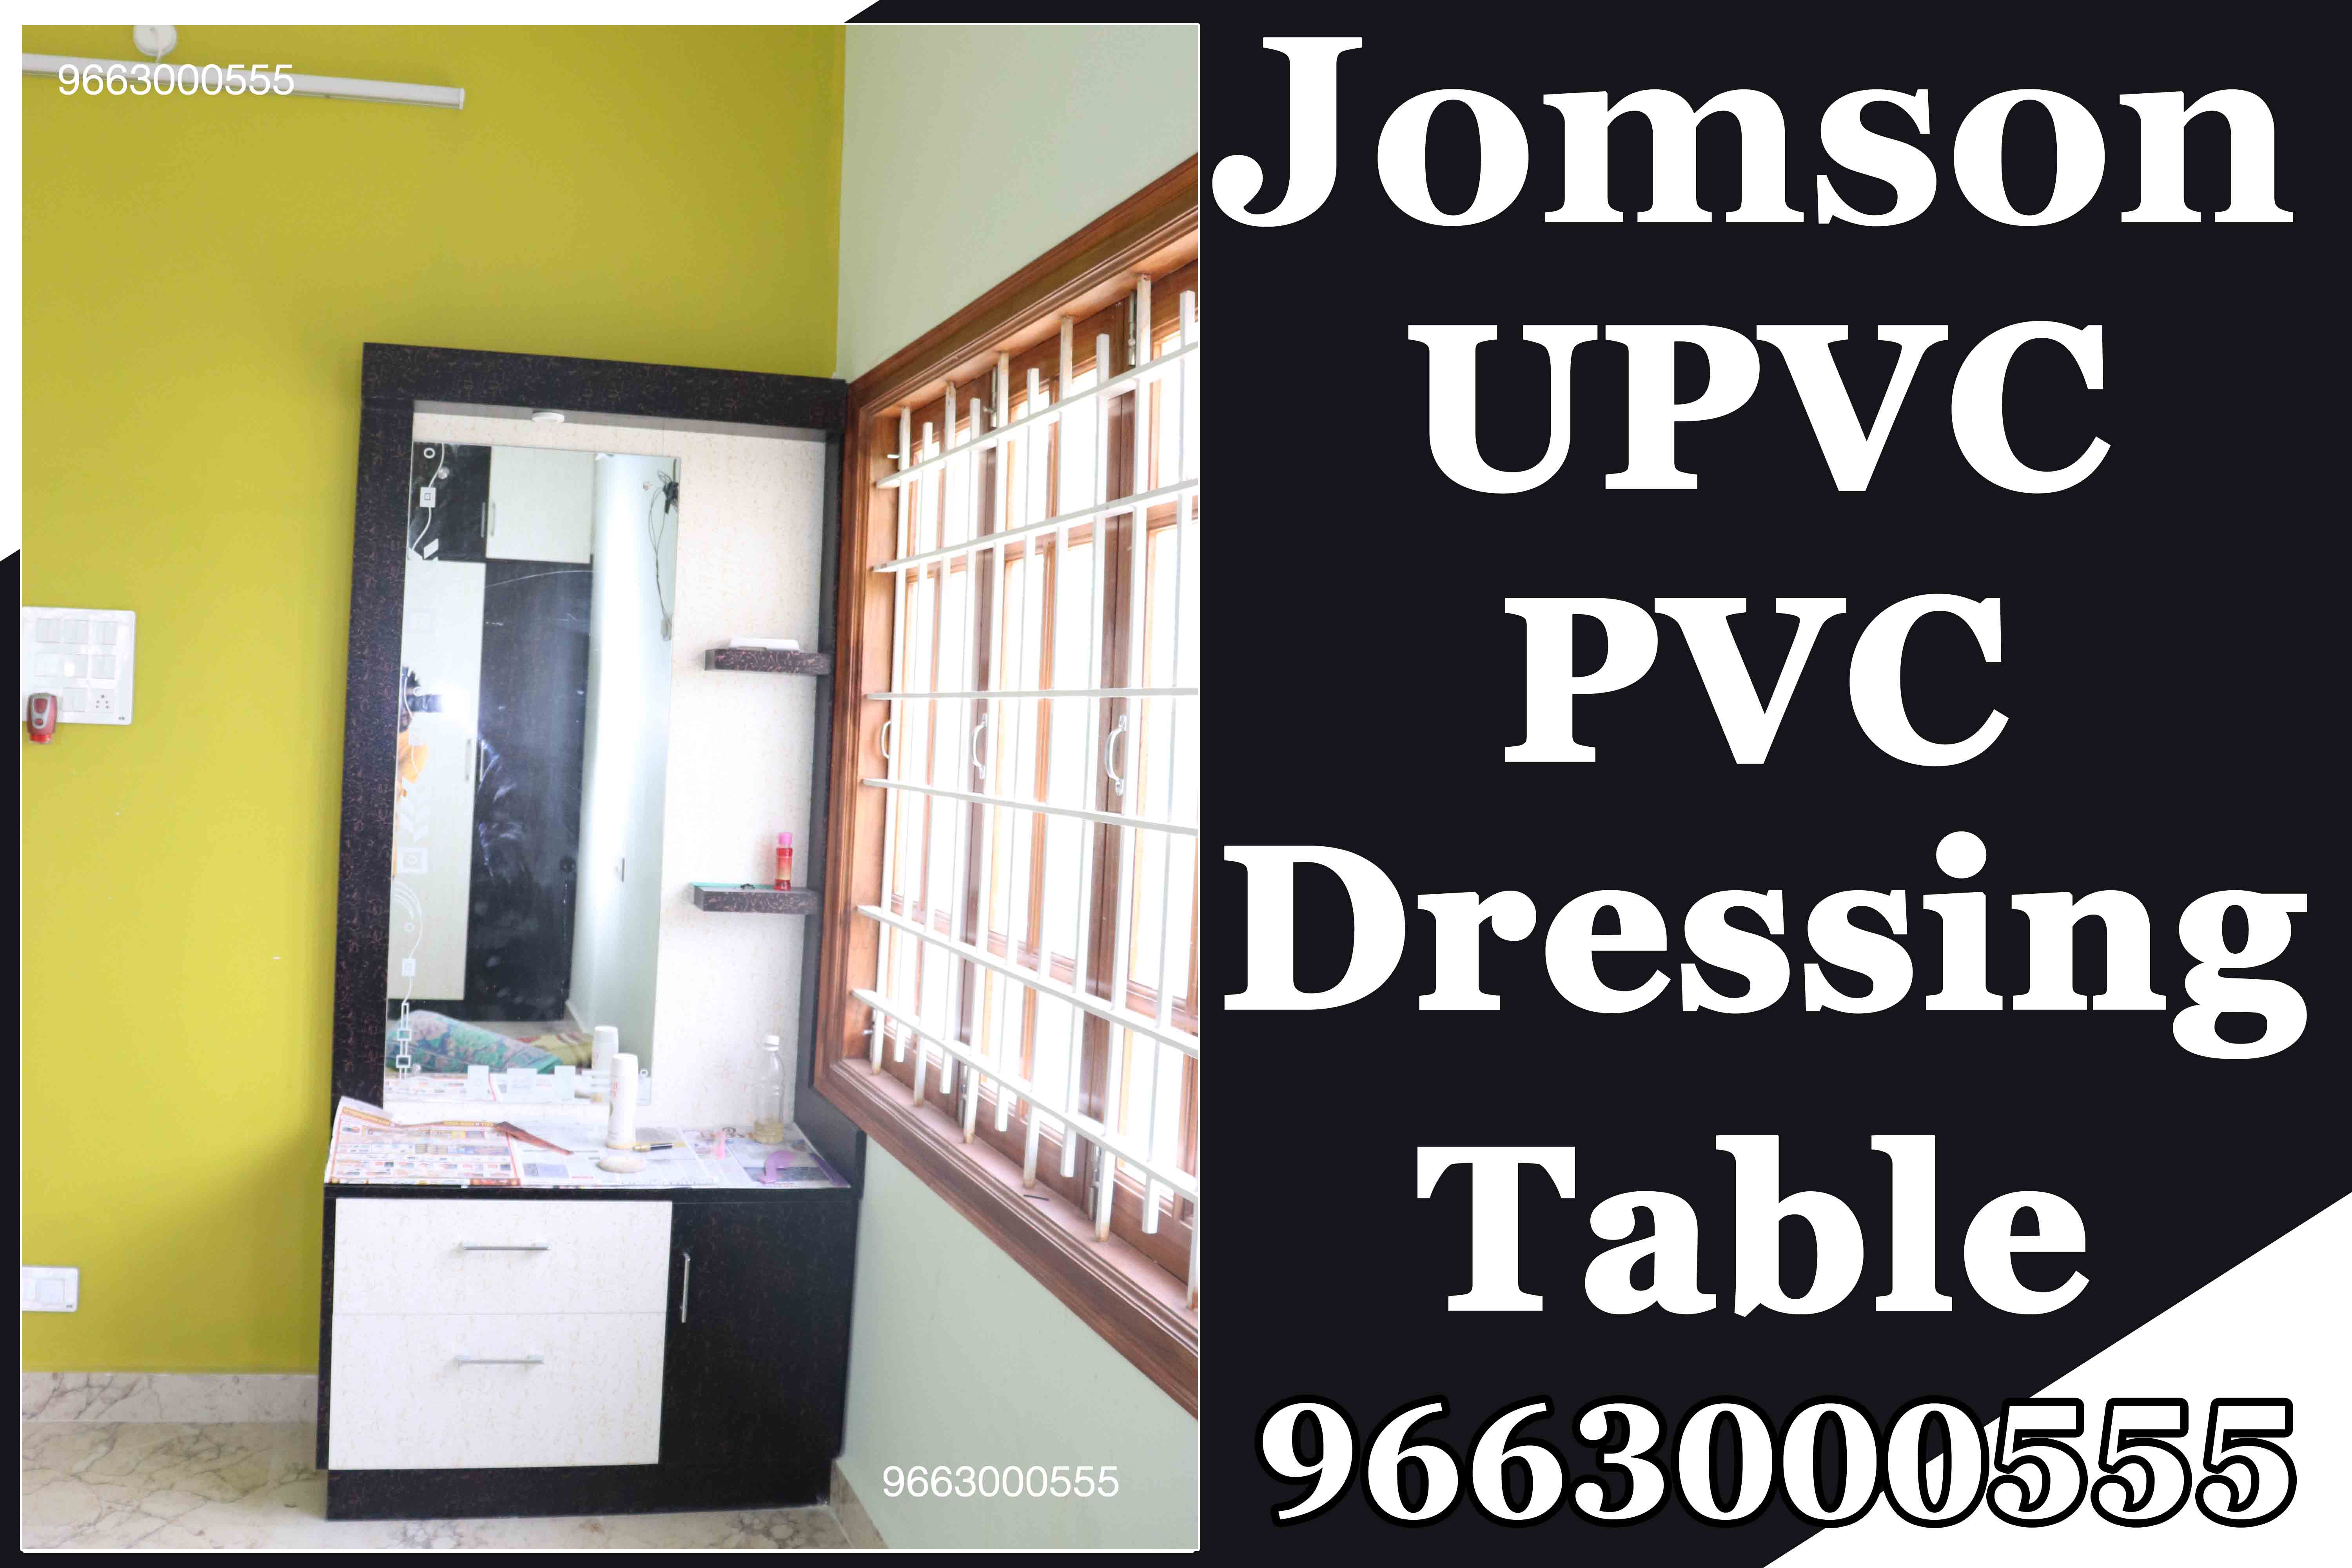 pvc dreesing table with mirror design